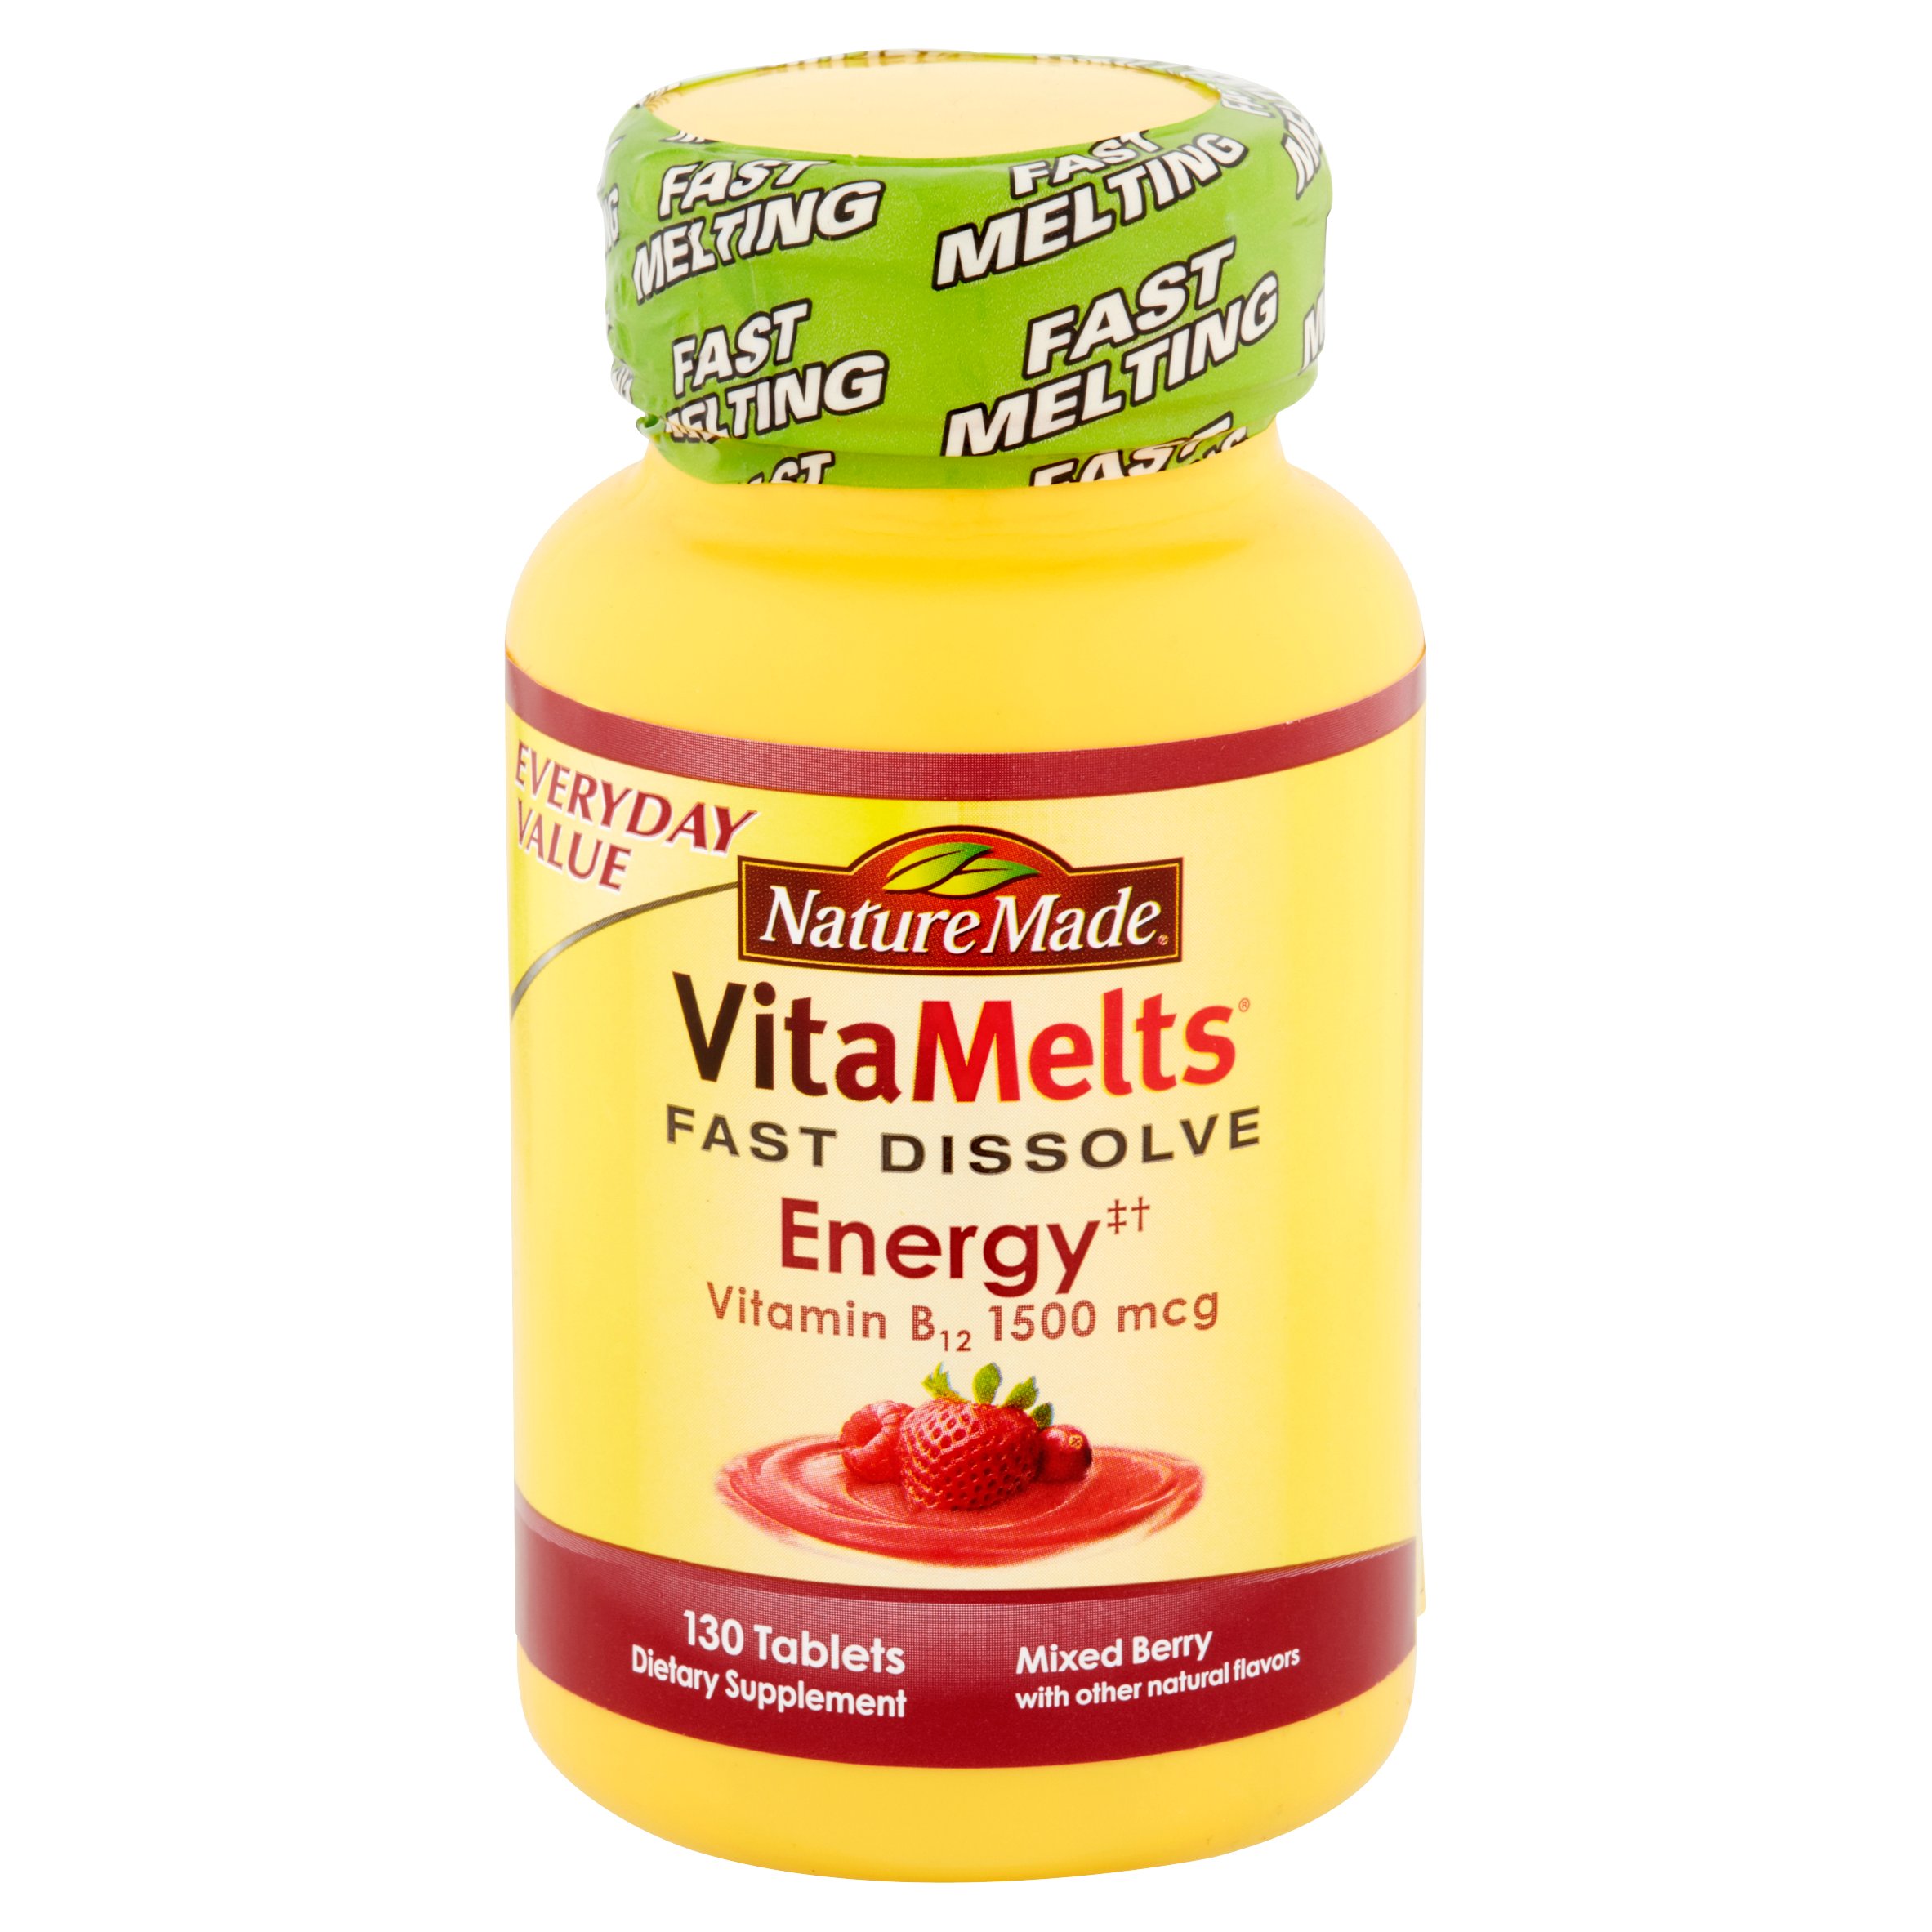 Nature Made VitaMelts Mixed Berry Vitamin B12 Fast Dissolve Tablets, 1500 mcg, 130 count - image 2 of 5